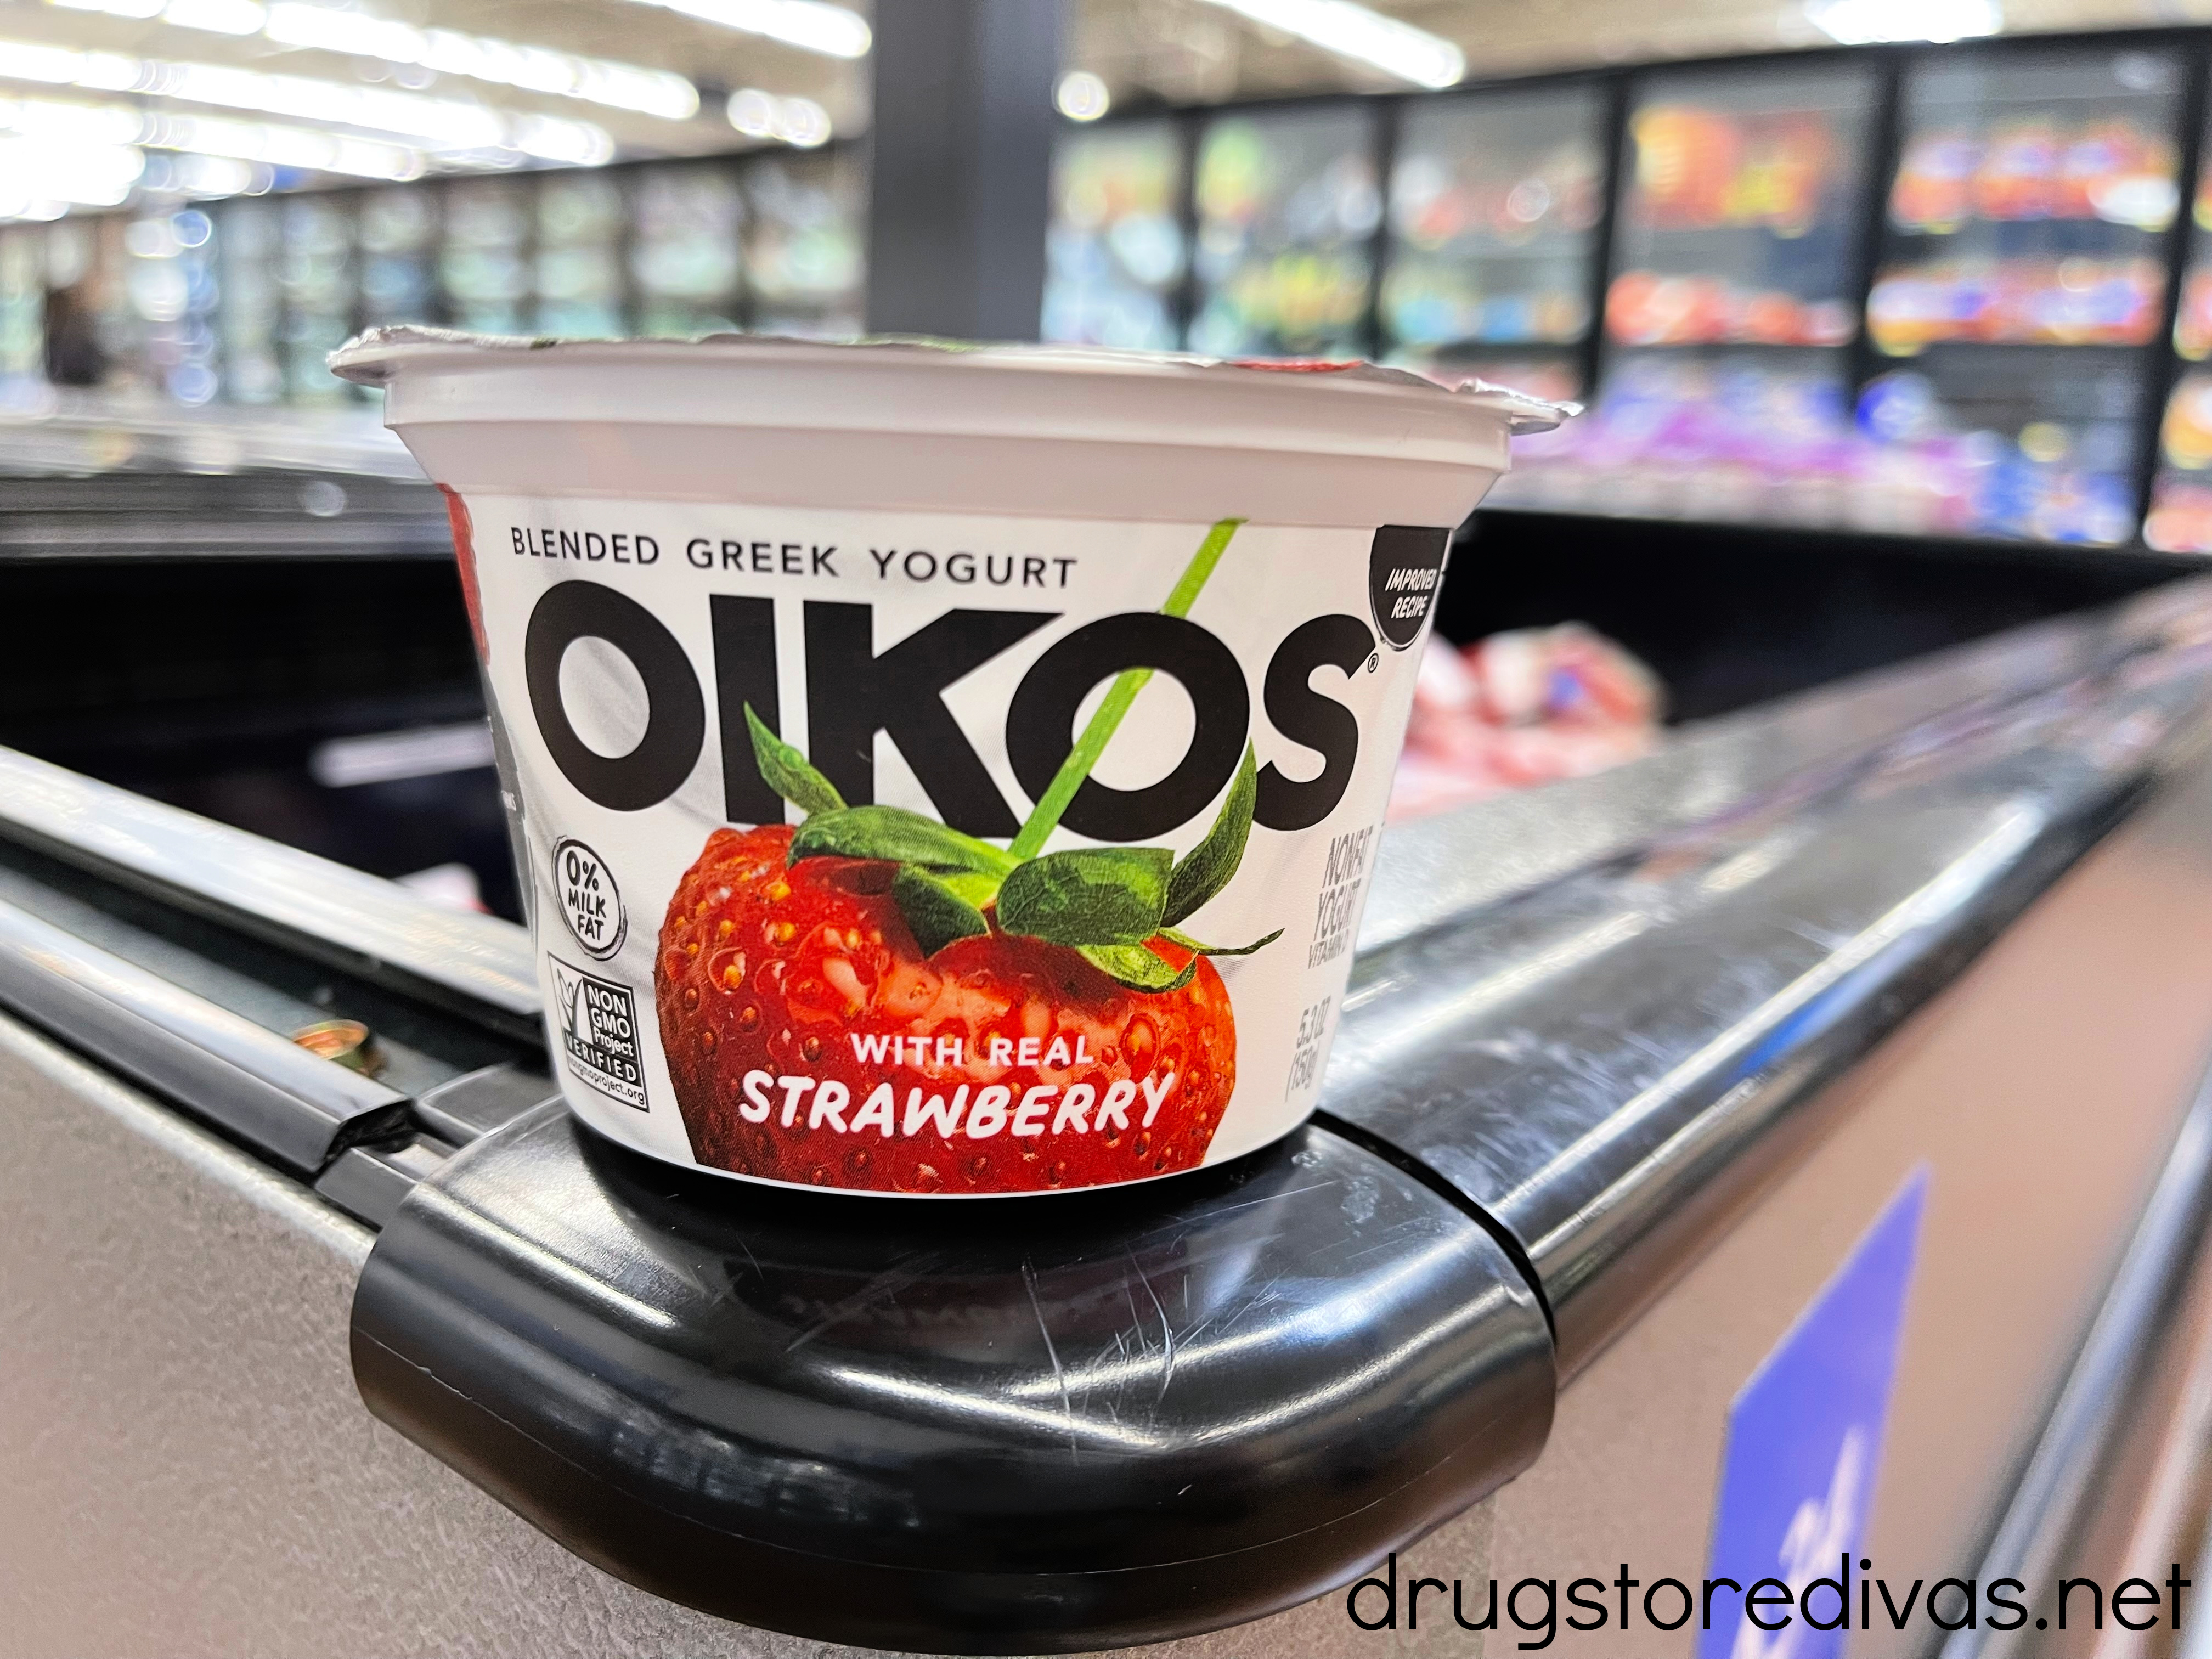 An Oikos yogurt container in the store.